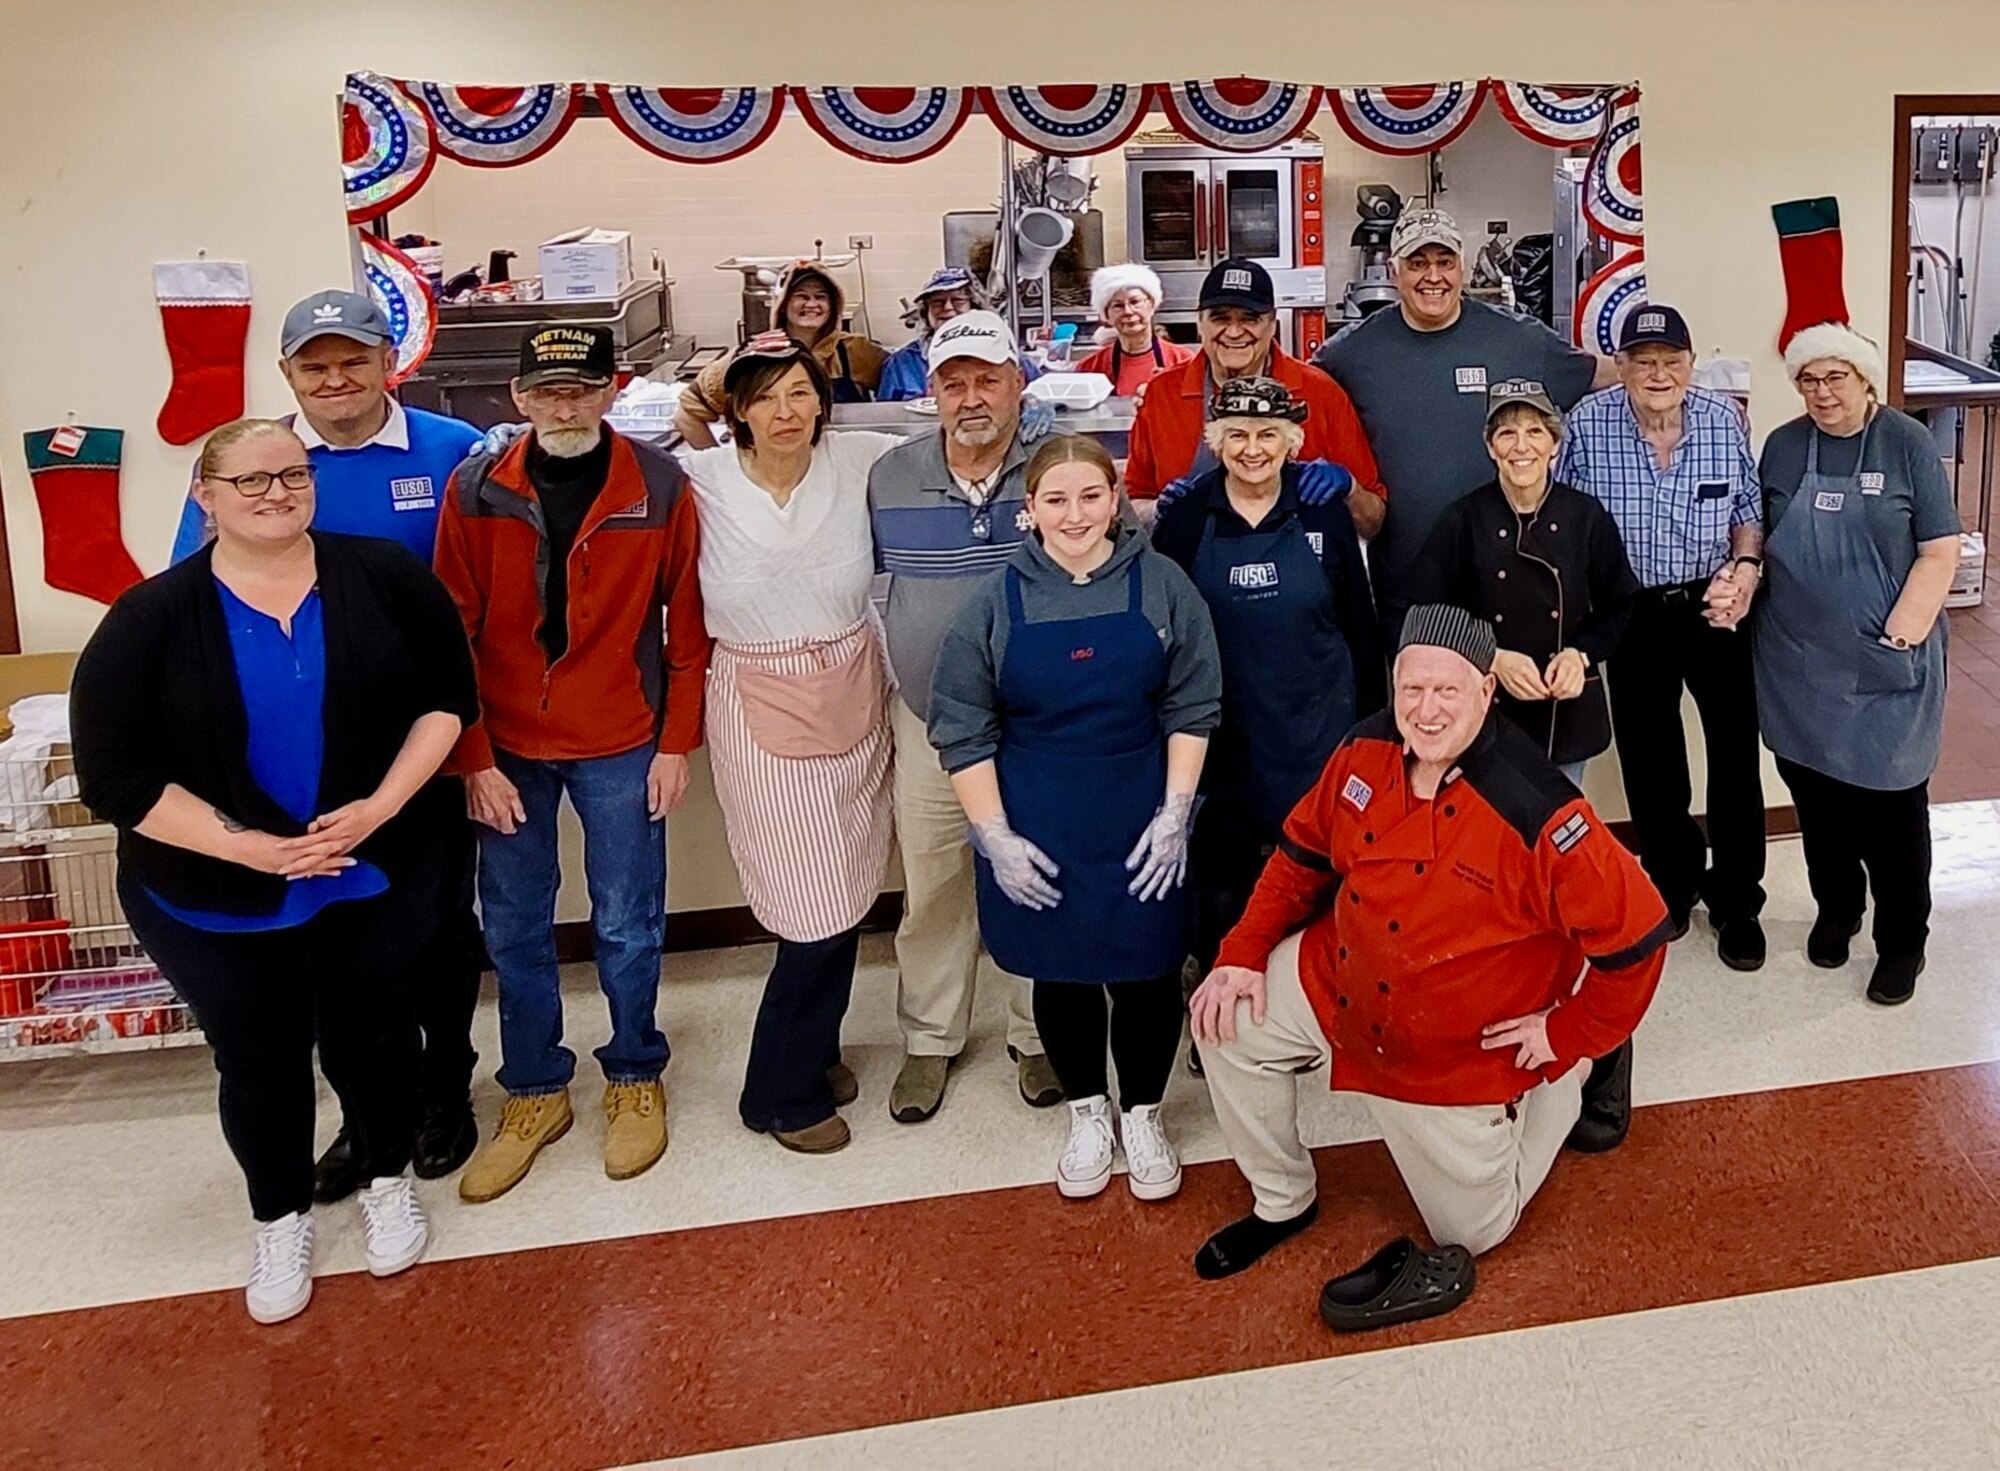 This week marked the final Monday Night USO Dinner at Westover.